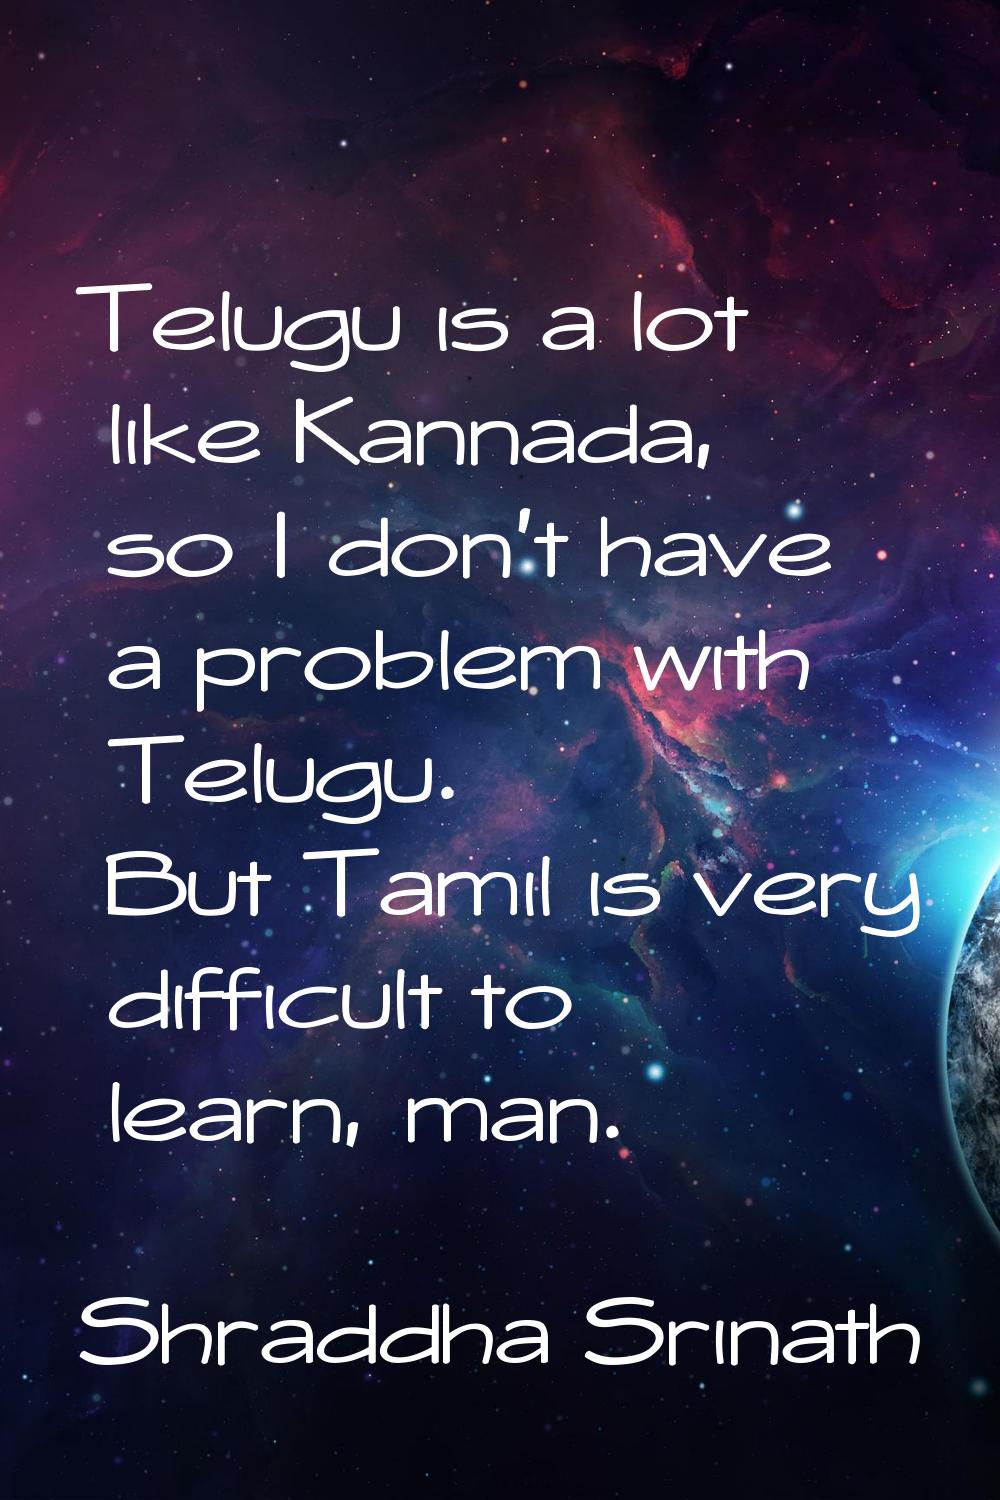 Telugu is a lot like Kannada, so I don't have a problem with Telugu. But Tamil is very difficult to